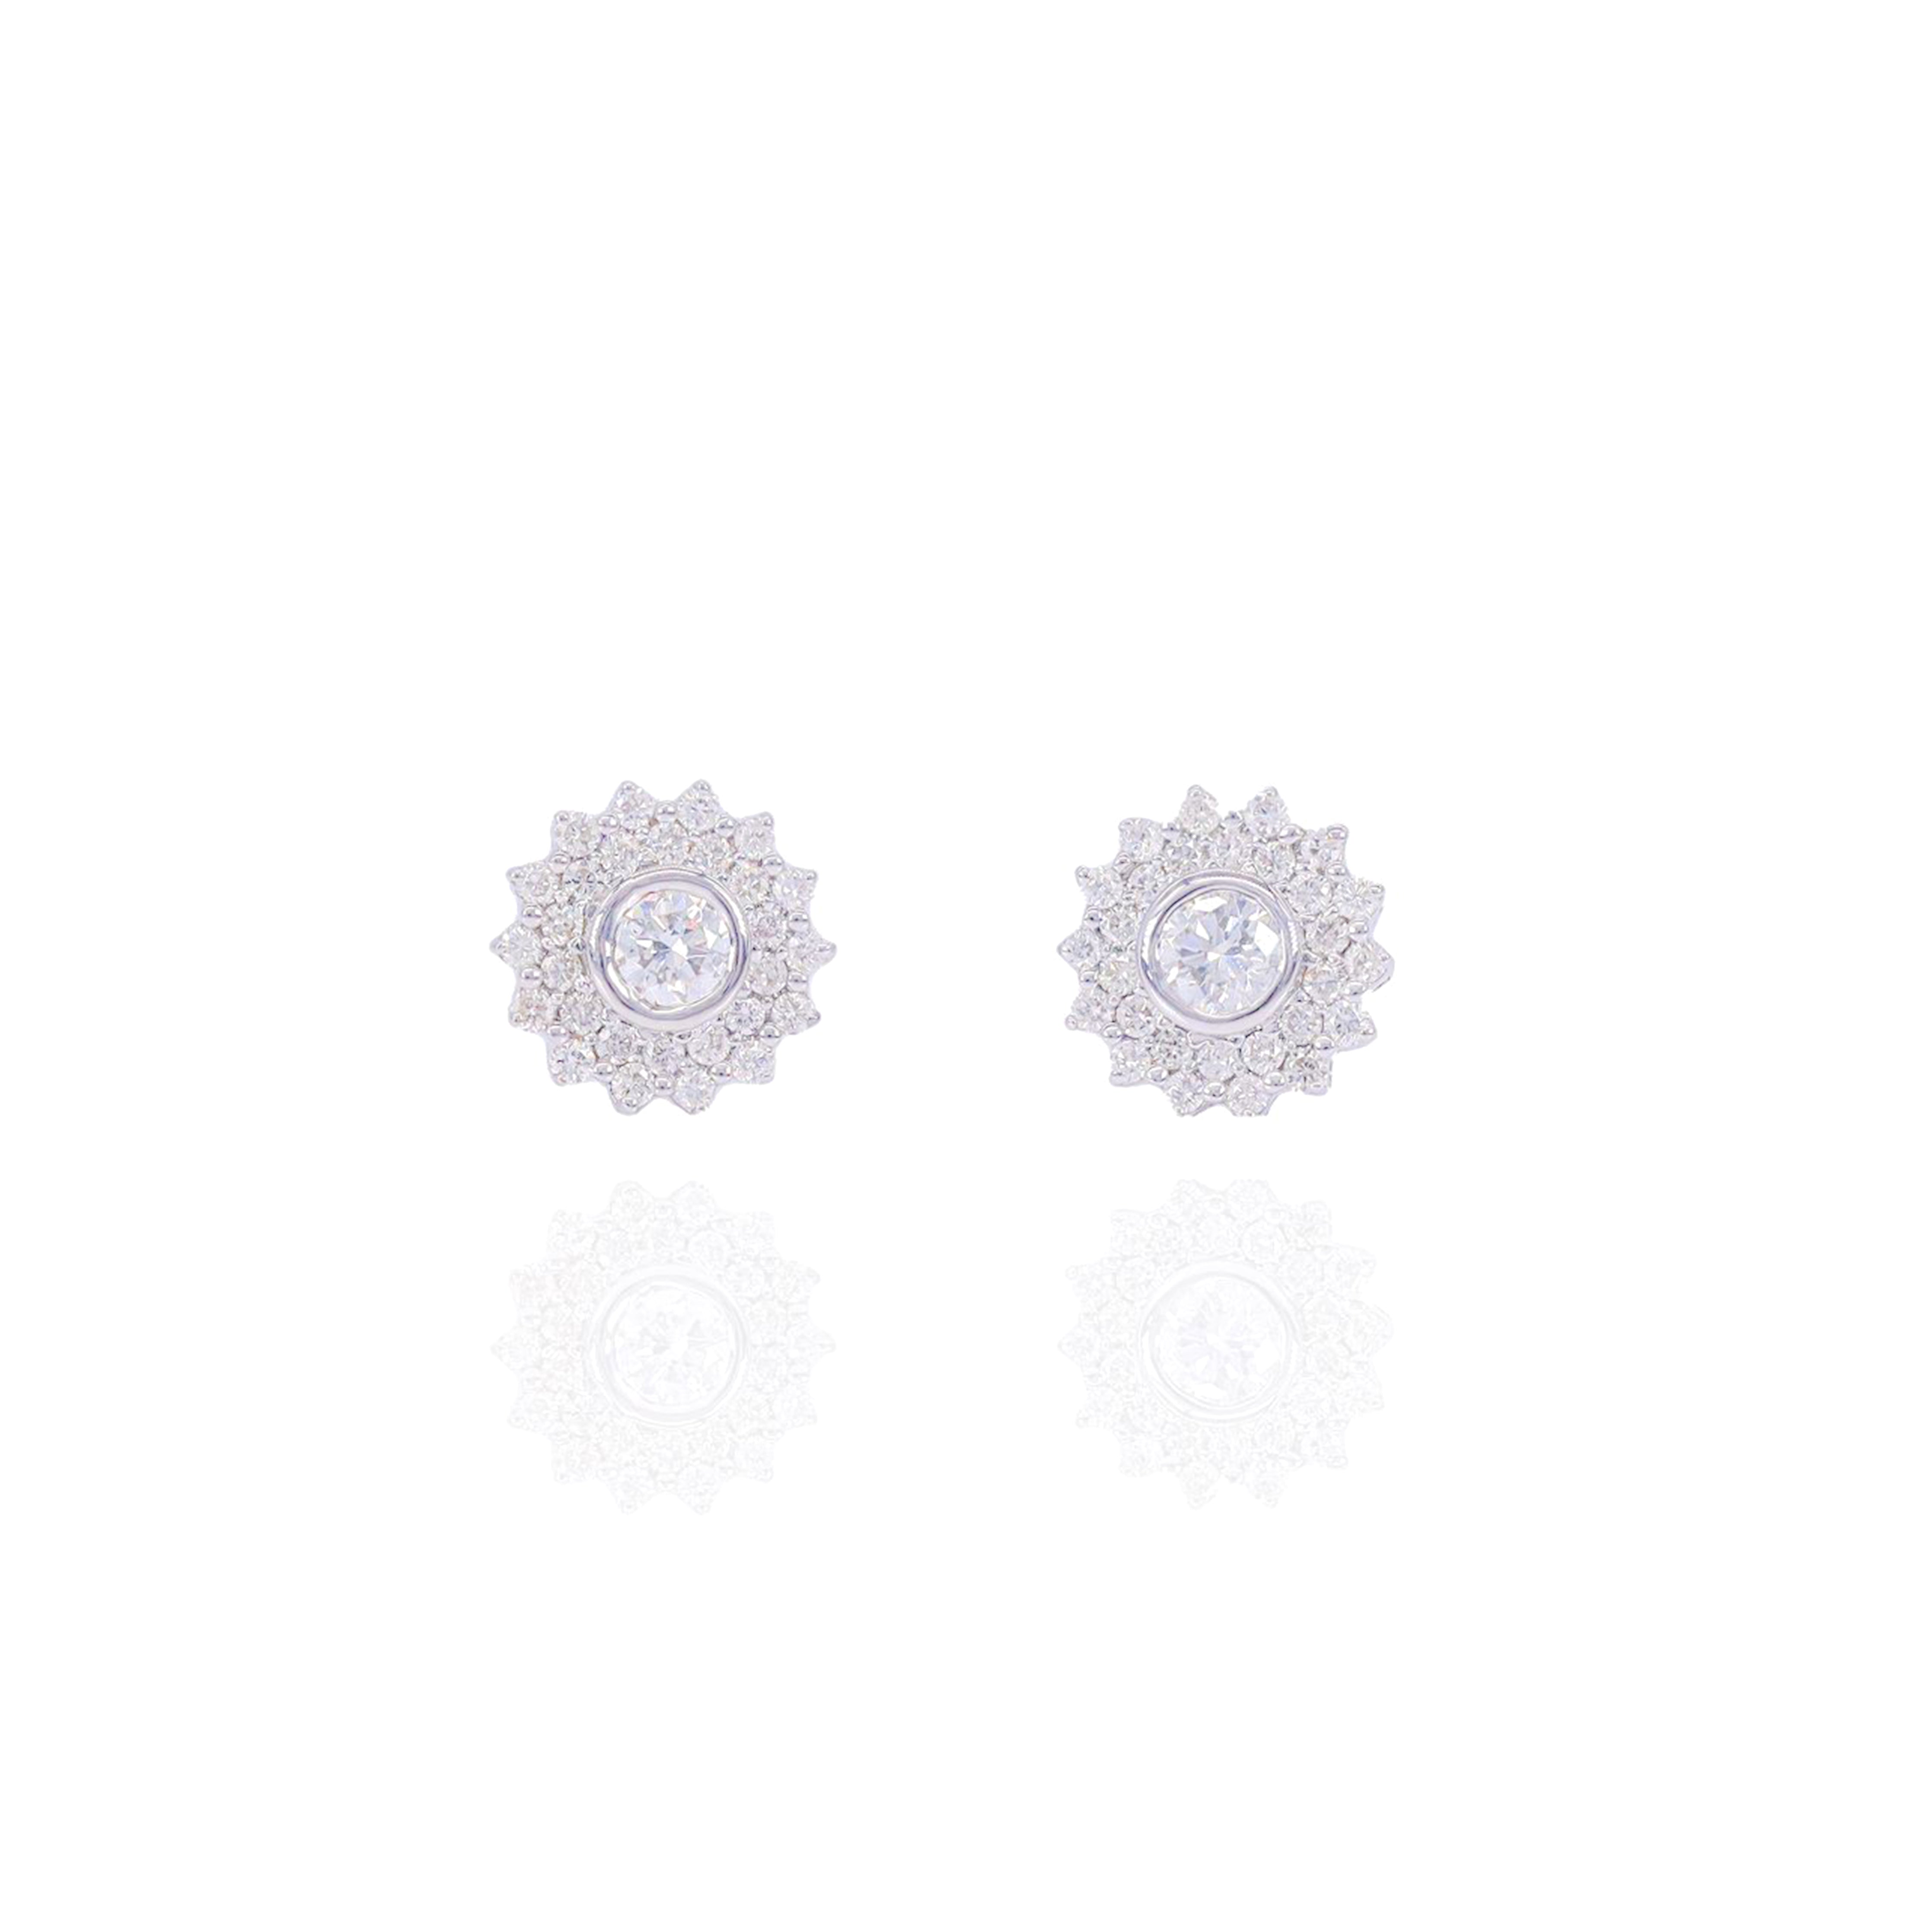 Jagged Cluster w/ Large Center Diamond Earrings